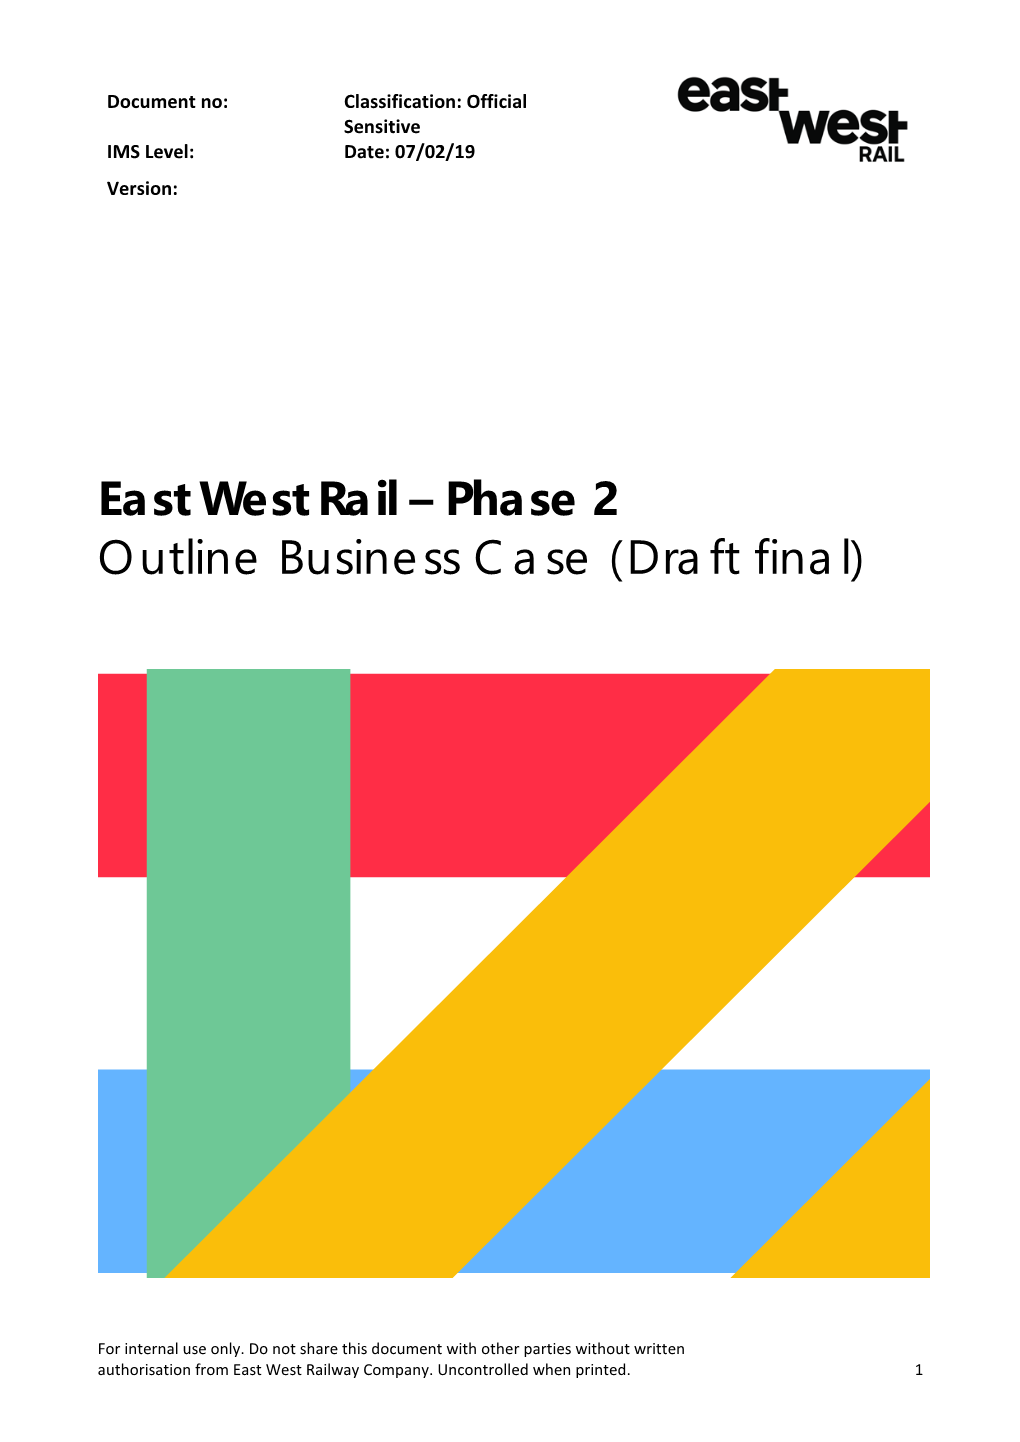 East West Rail – Phase 2 Outline Business Case (Draft Final)